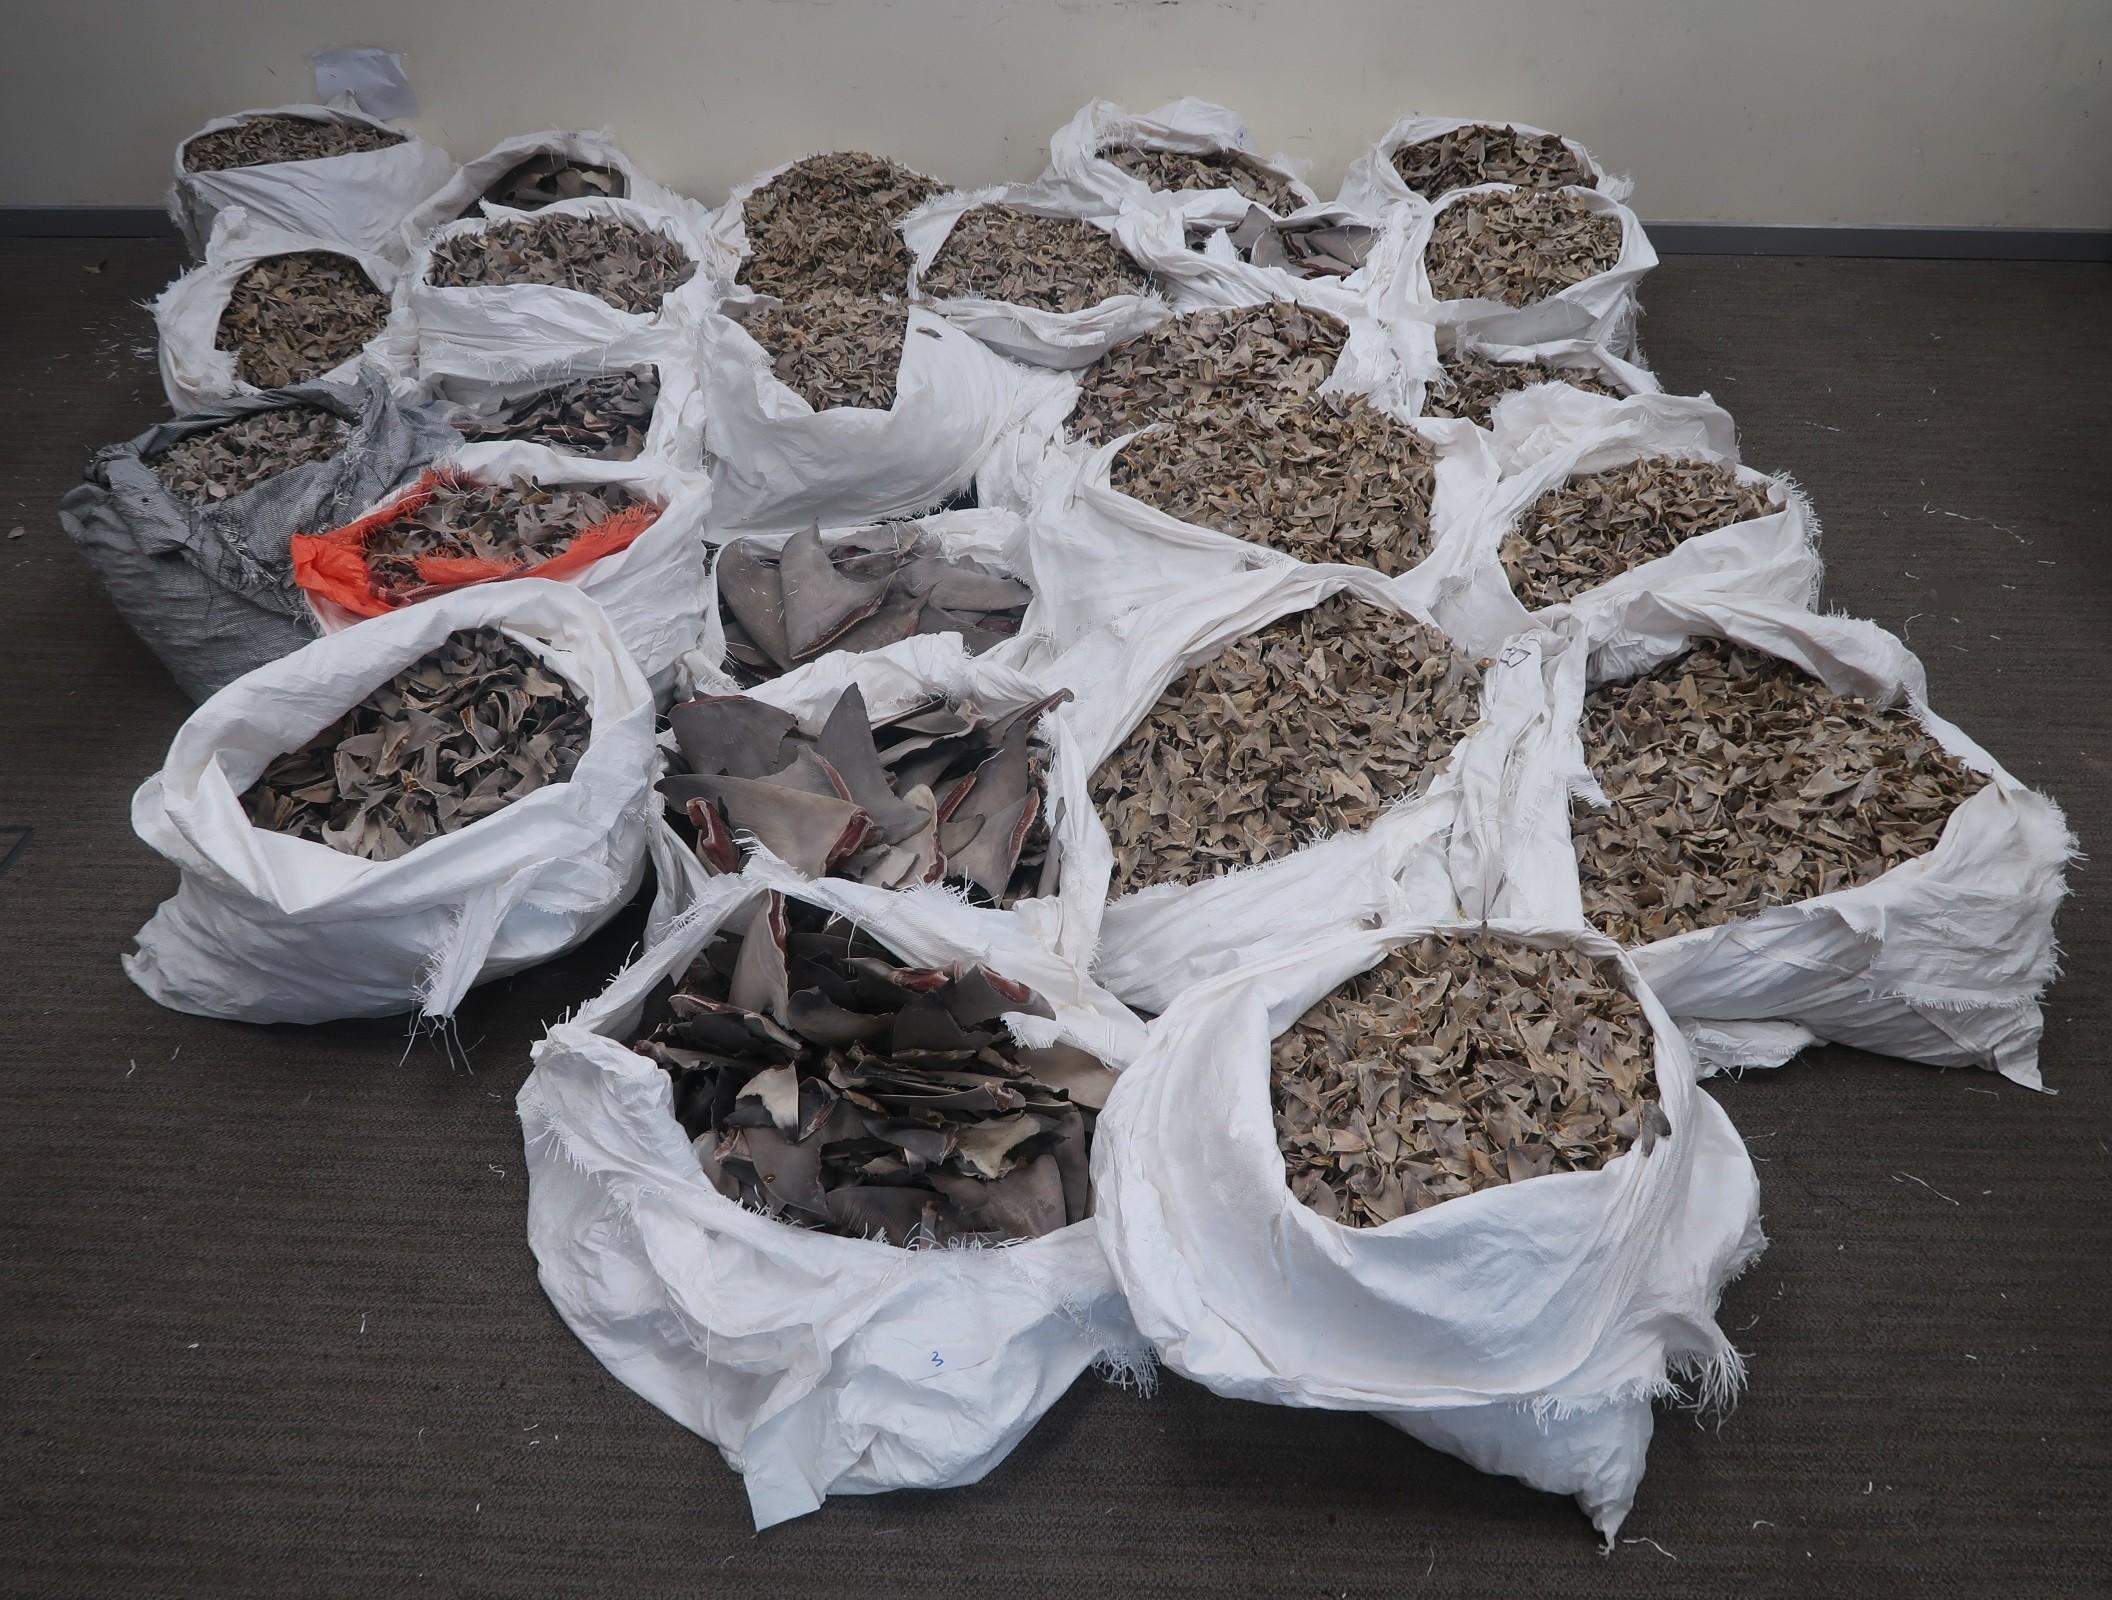 Hong Kong Customs yesterday (January 15) seized about 800 kilograms of suspected scheduled shark fins, with an estimated market value of about $4 million, at Hong Kong International Airport. Photo shows the suspected scheduled shark fins seized.